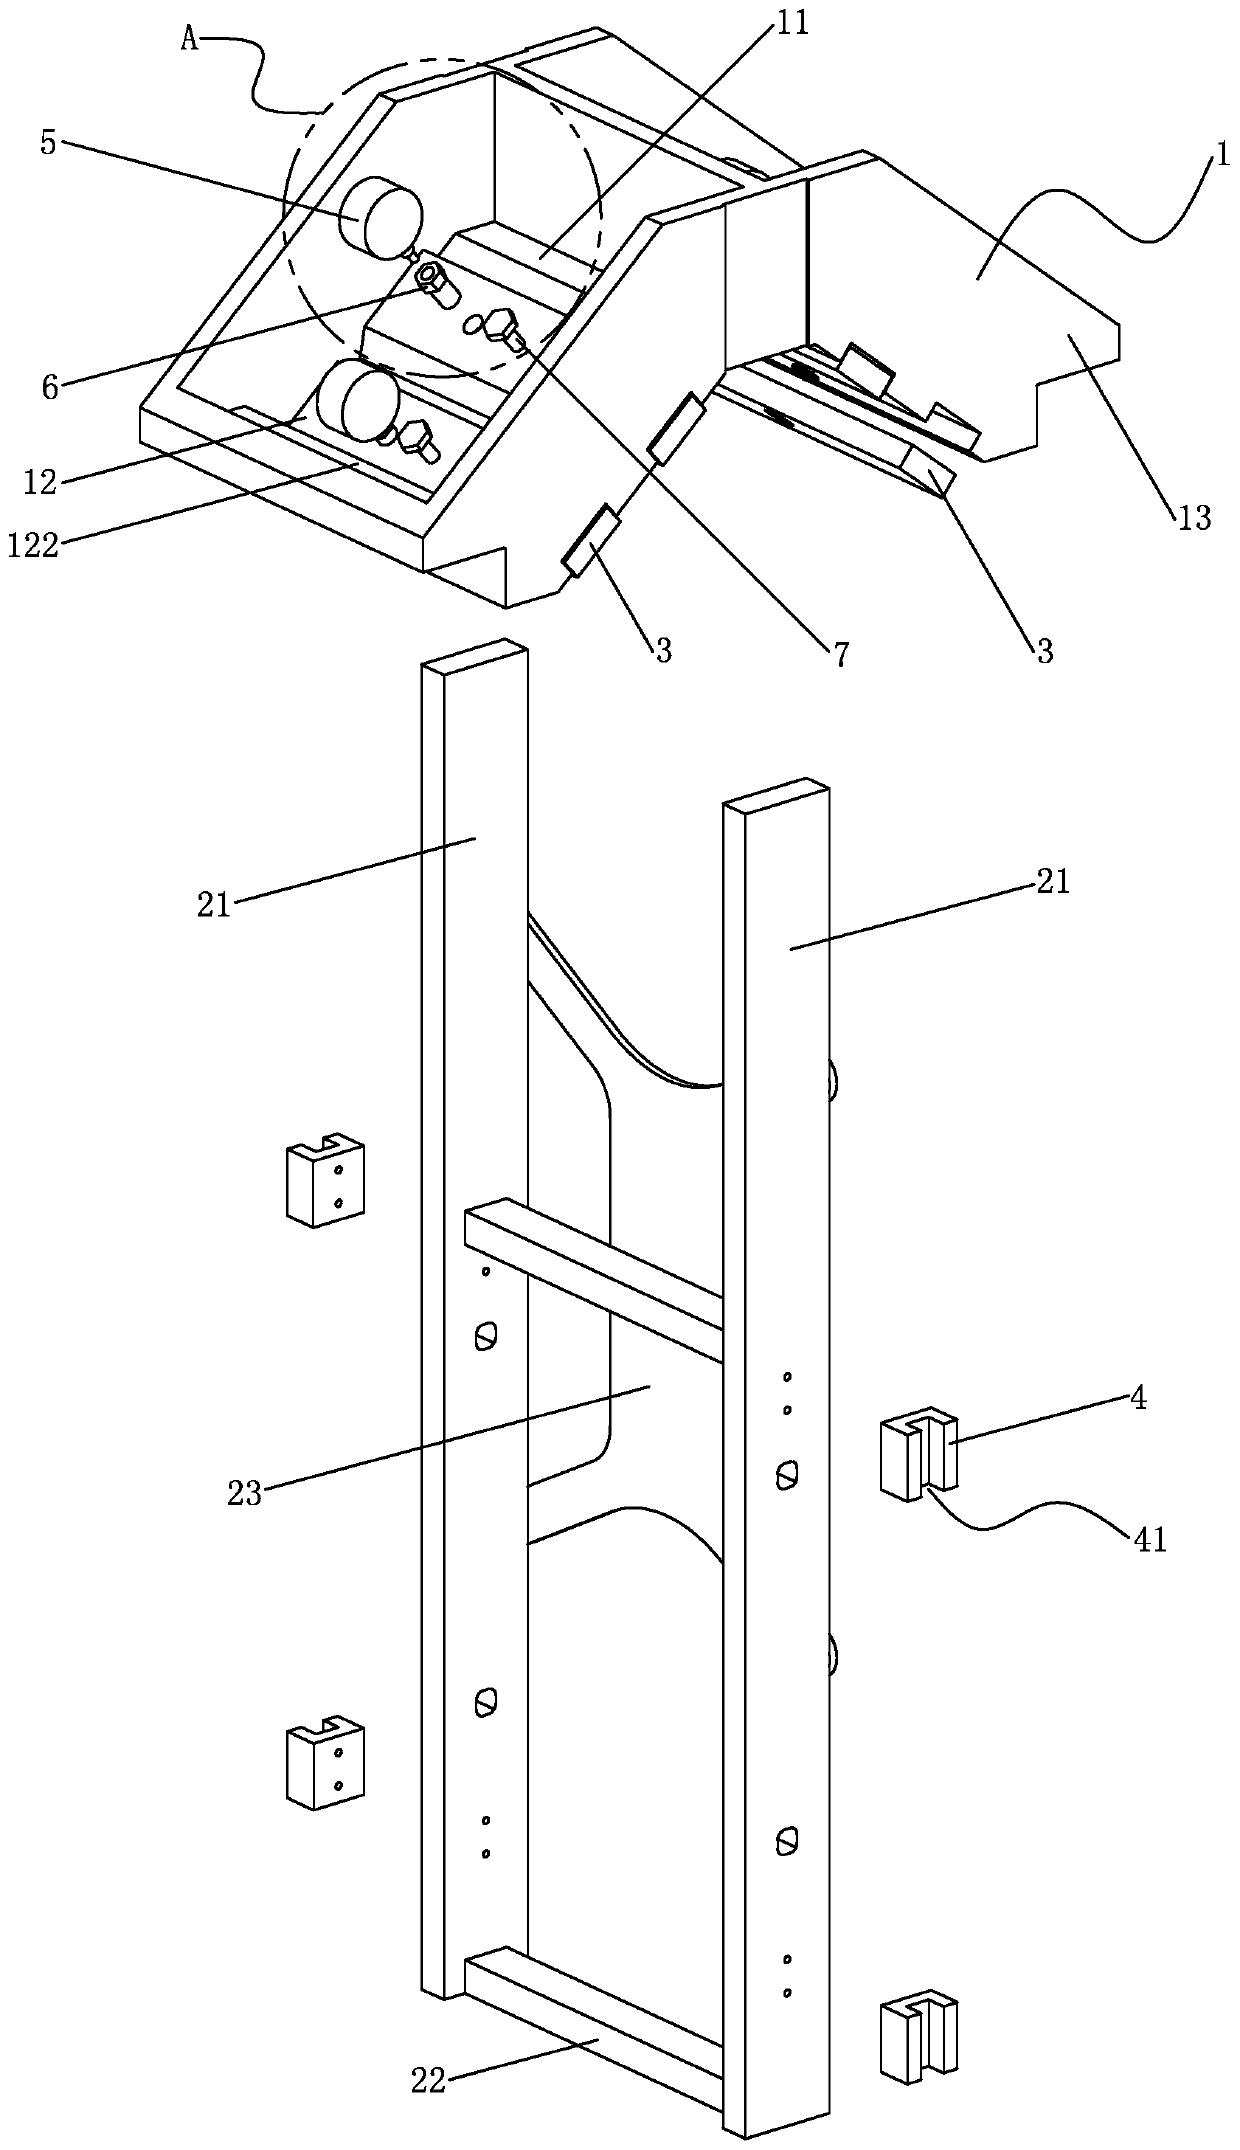 A guide rail installation and adjustment device and installation method for flat knitting machines